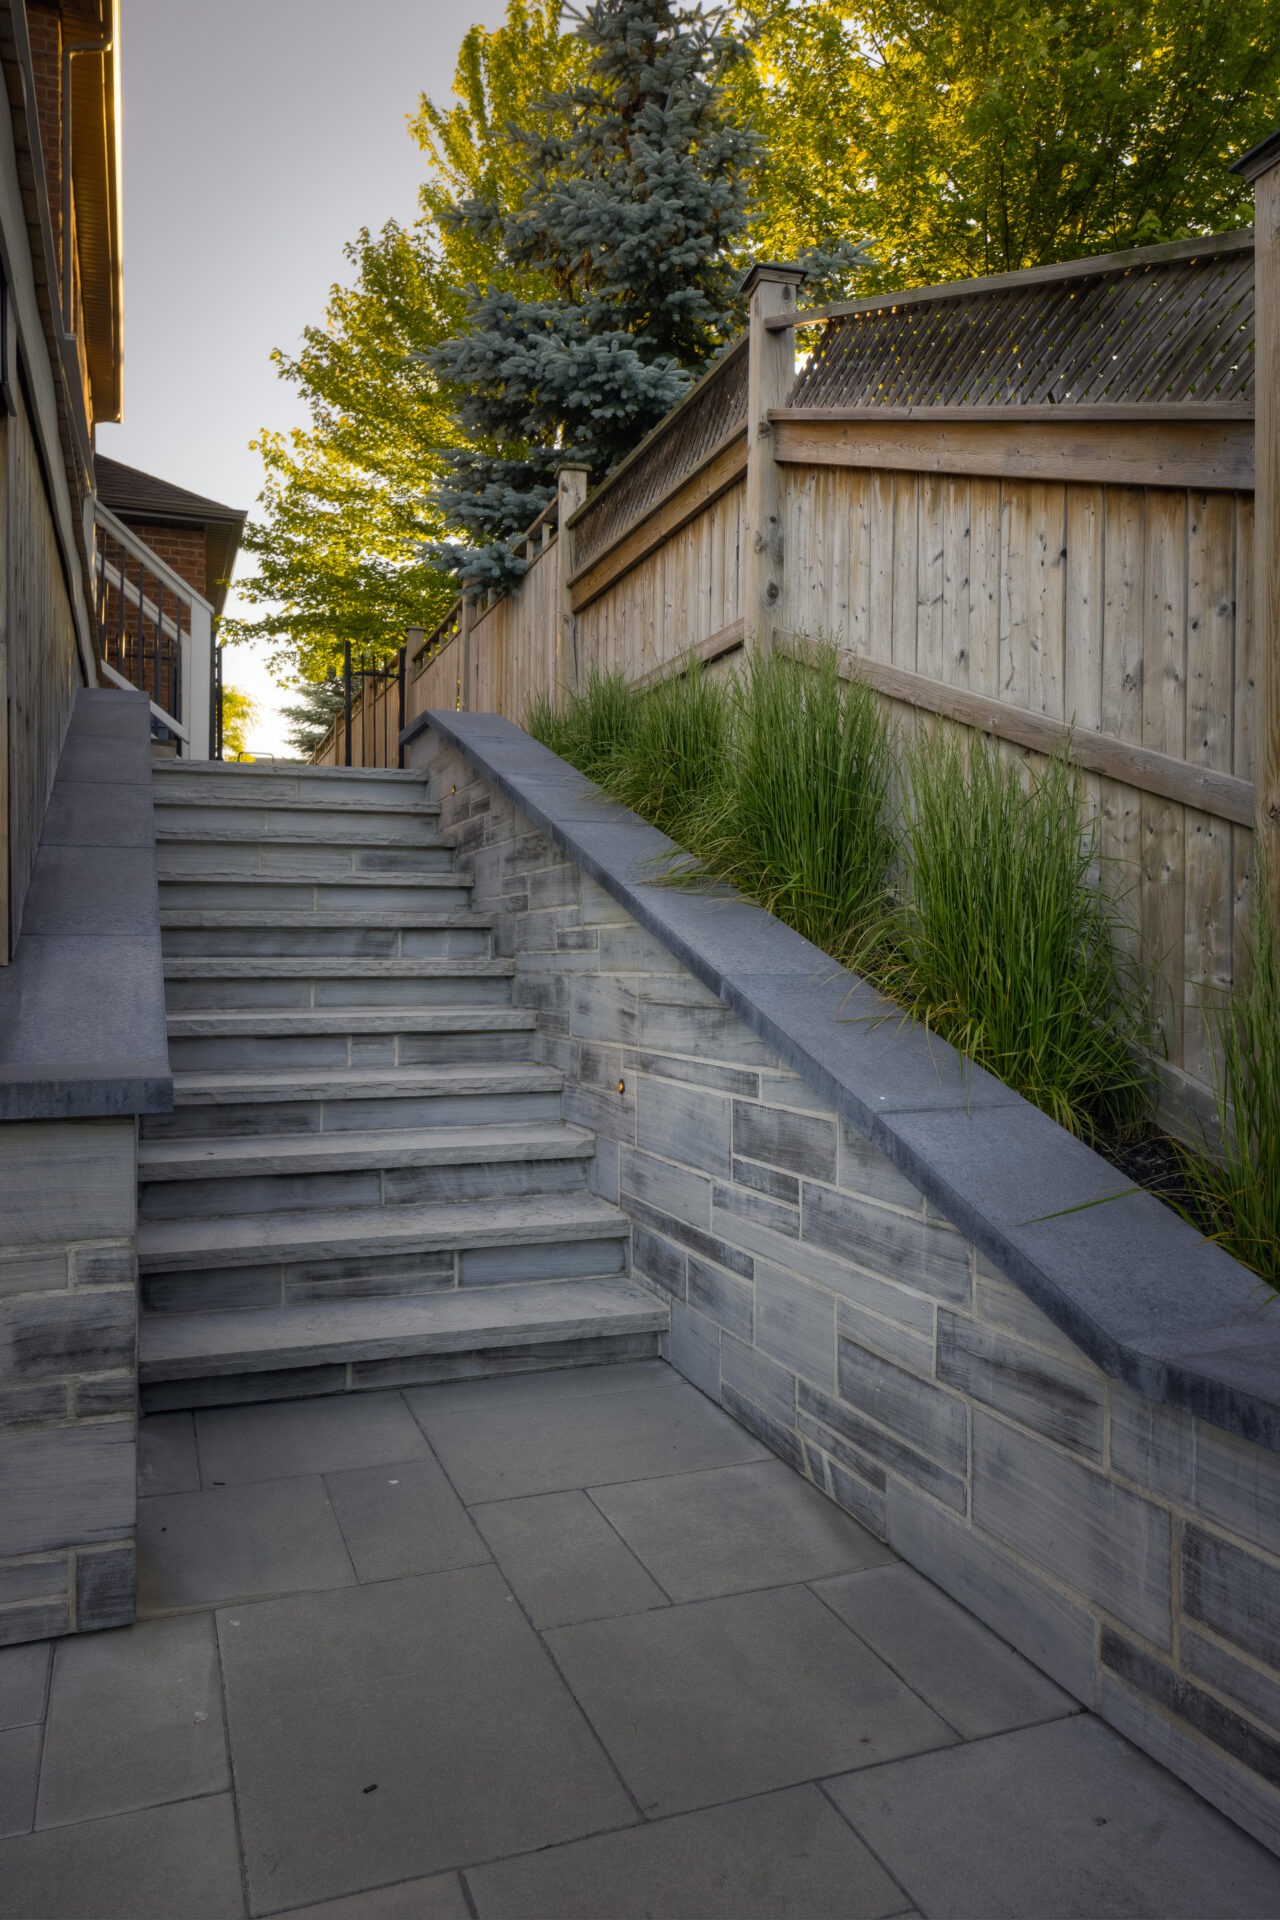 This image shows a set of outdoor steps made of gray stone tiles, framed by a wooden fence and accented with green ornamental grasses.